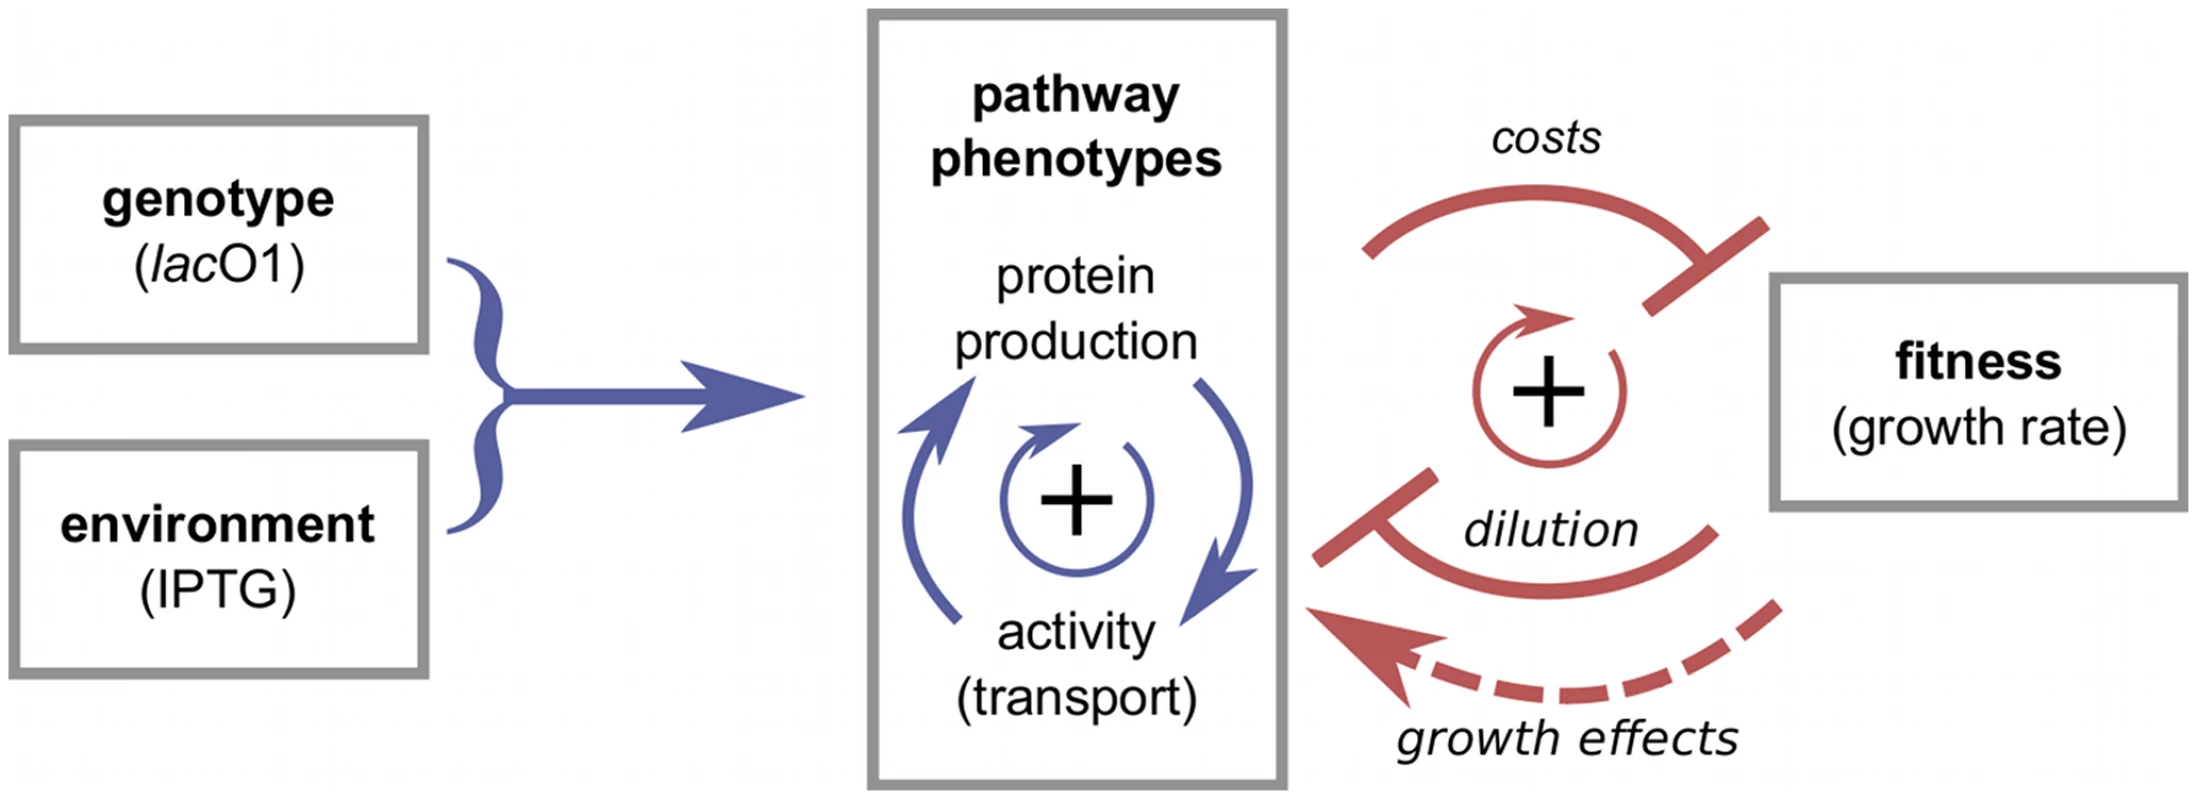 From genotype and environment to pathway phenotypes and fitness.